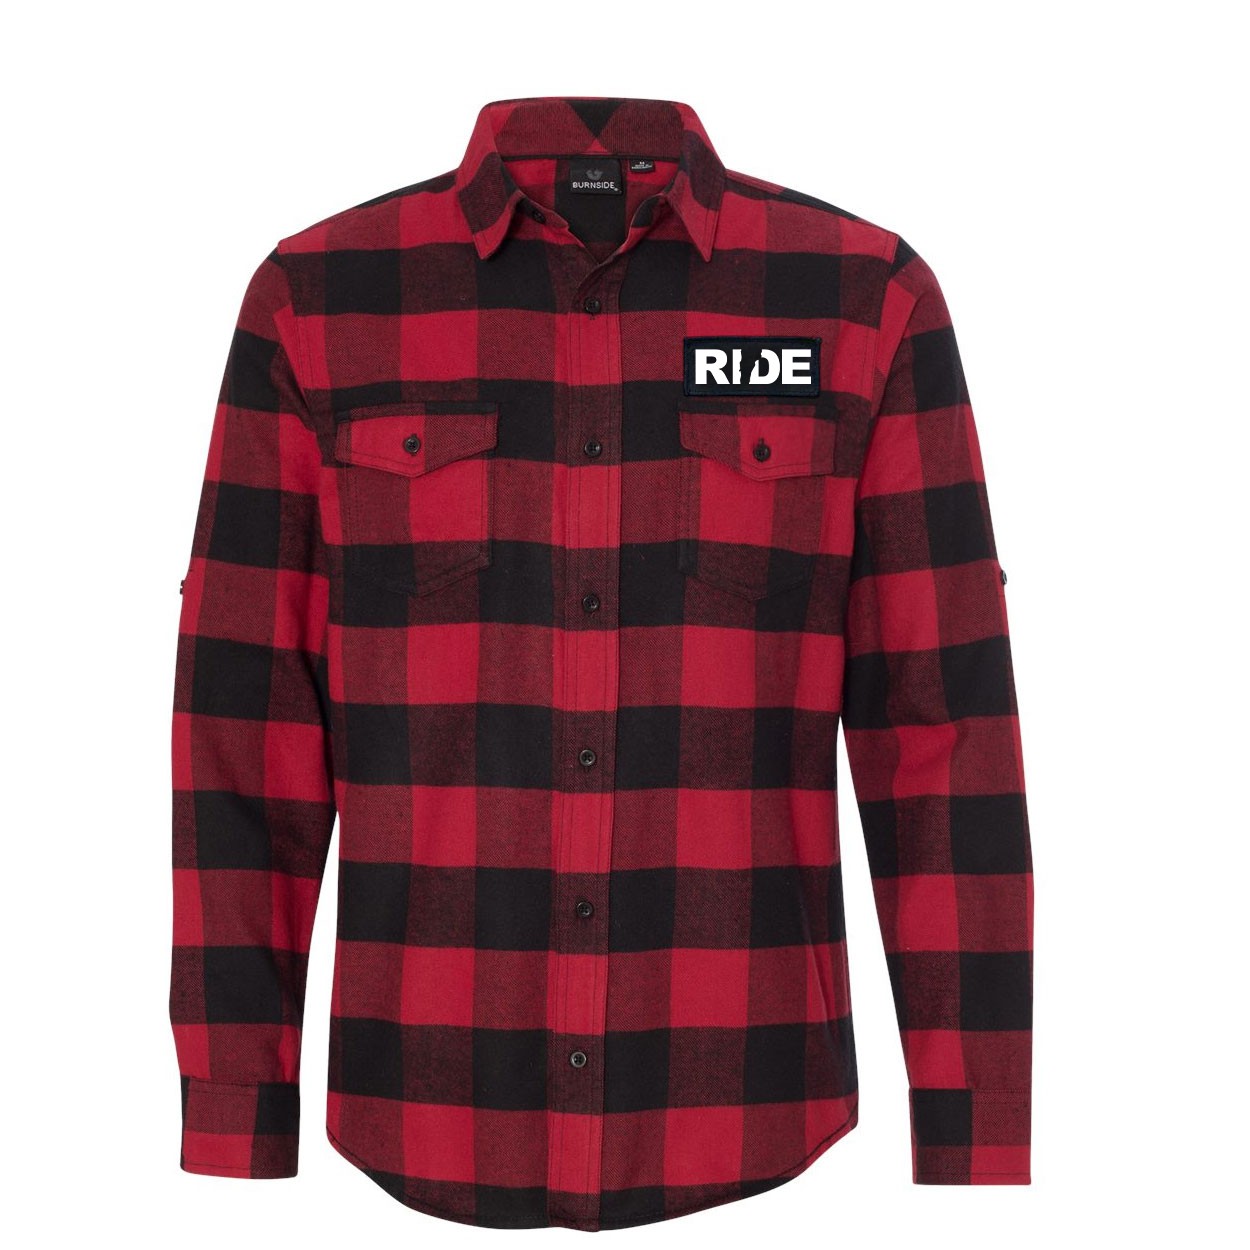 Ride Vermont Classic Unisex Long Sleeve Woven Patch Flannel Shirt Red/Black Buffalo (White Logo)